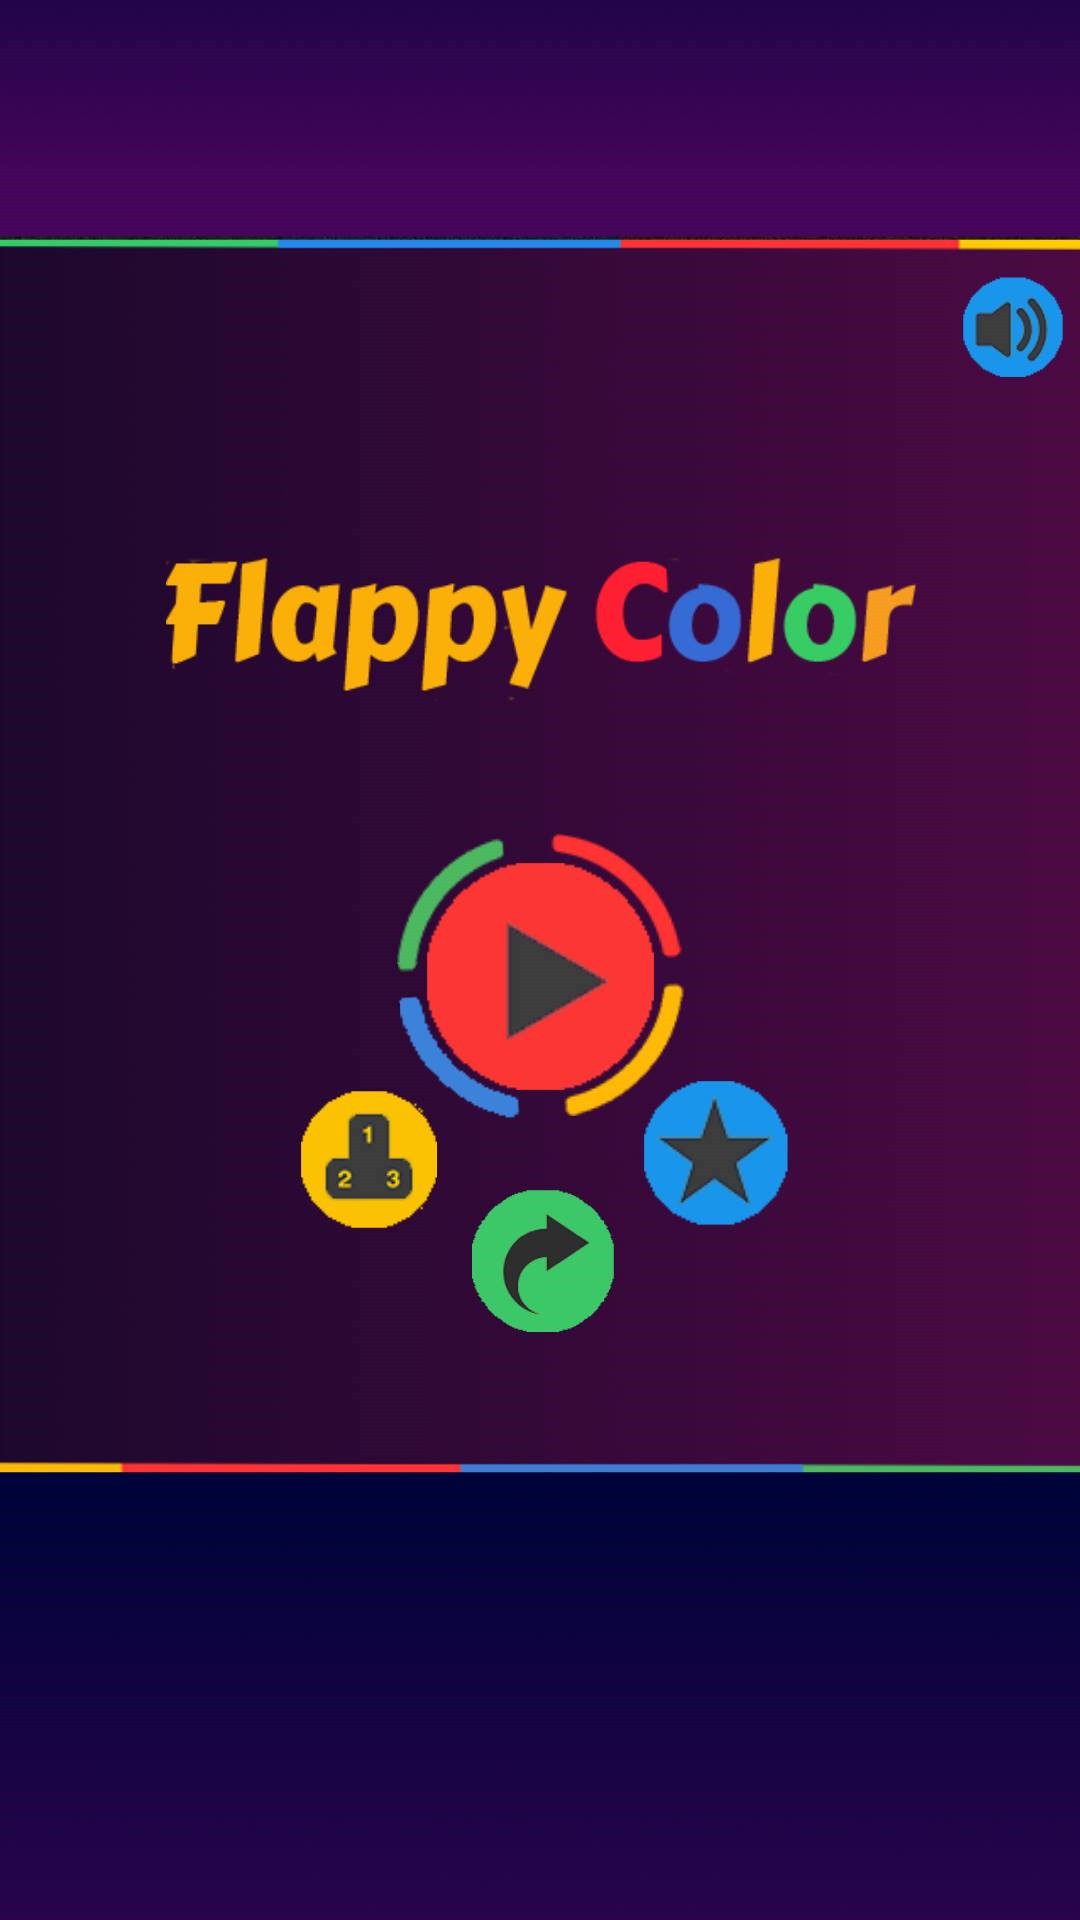 Flappy Color